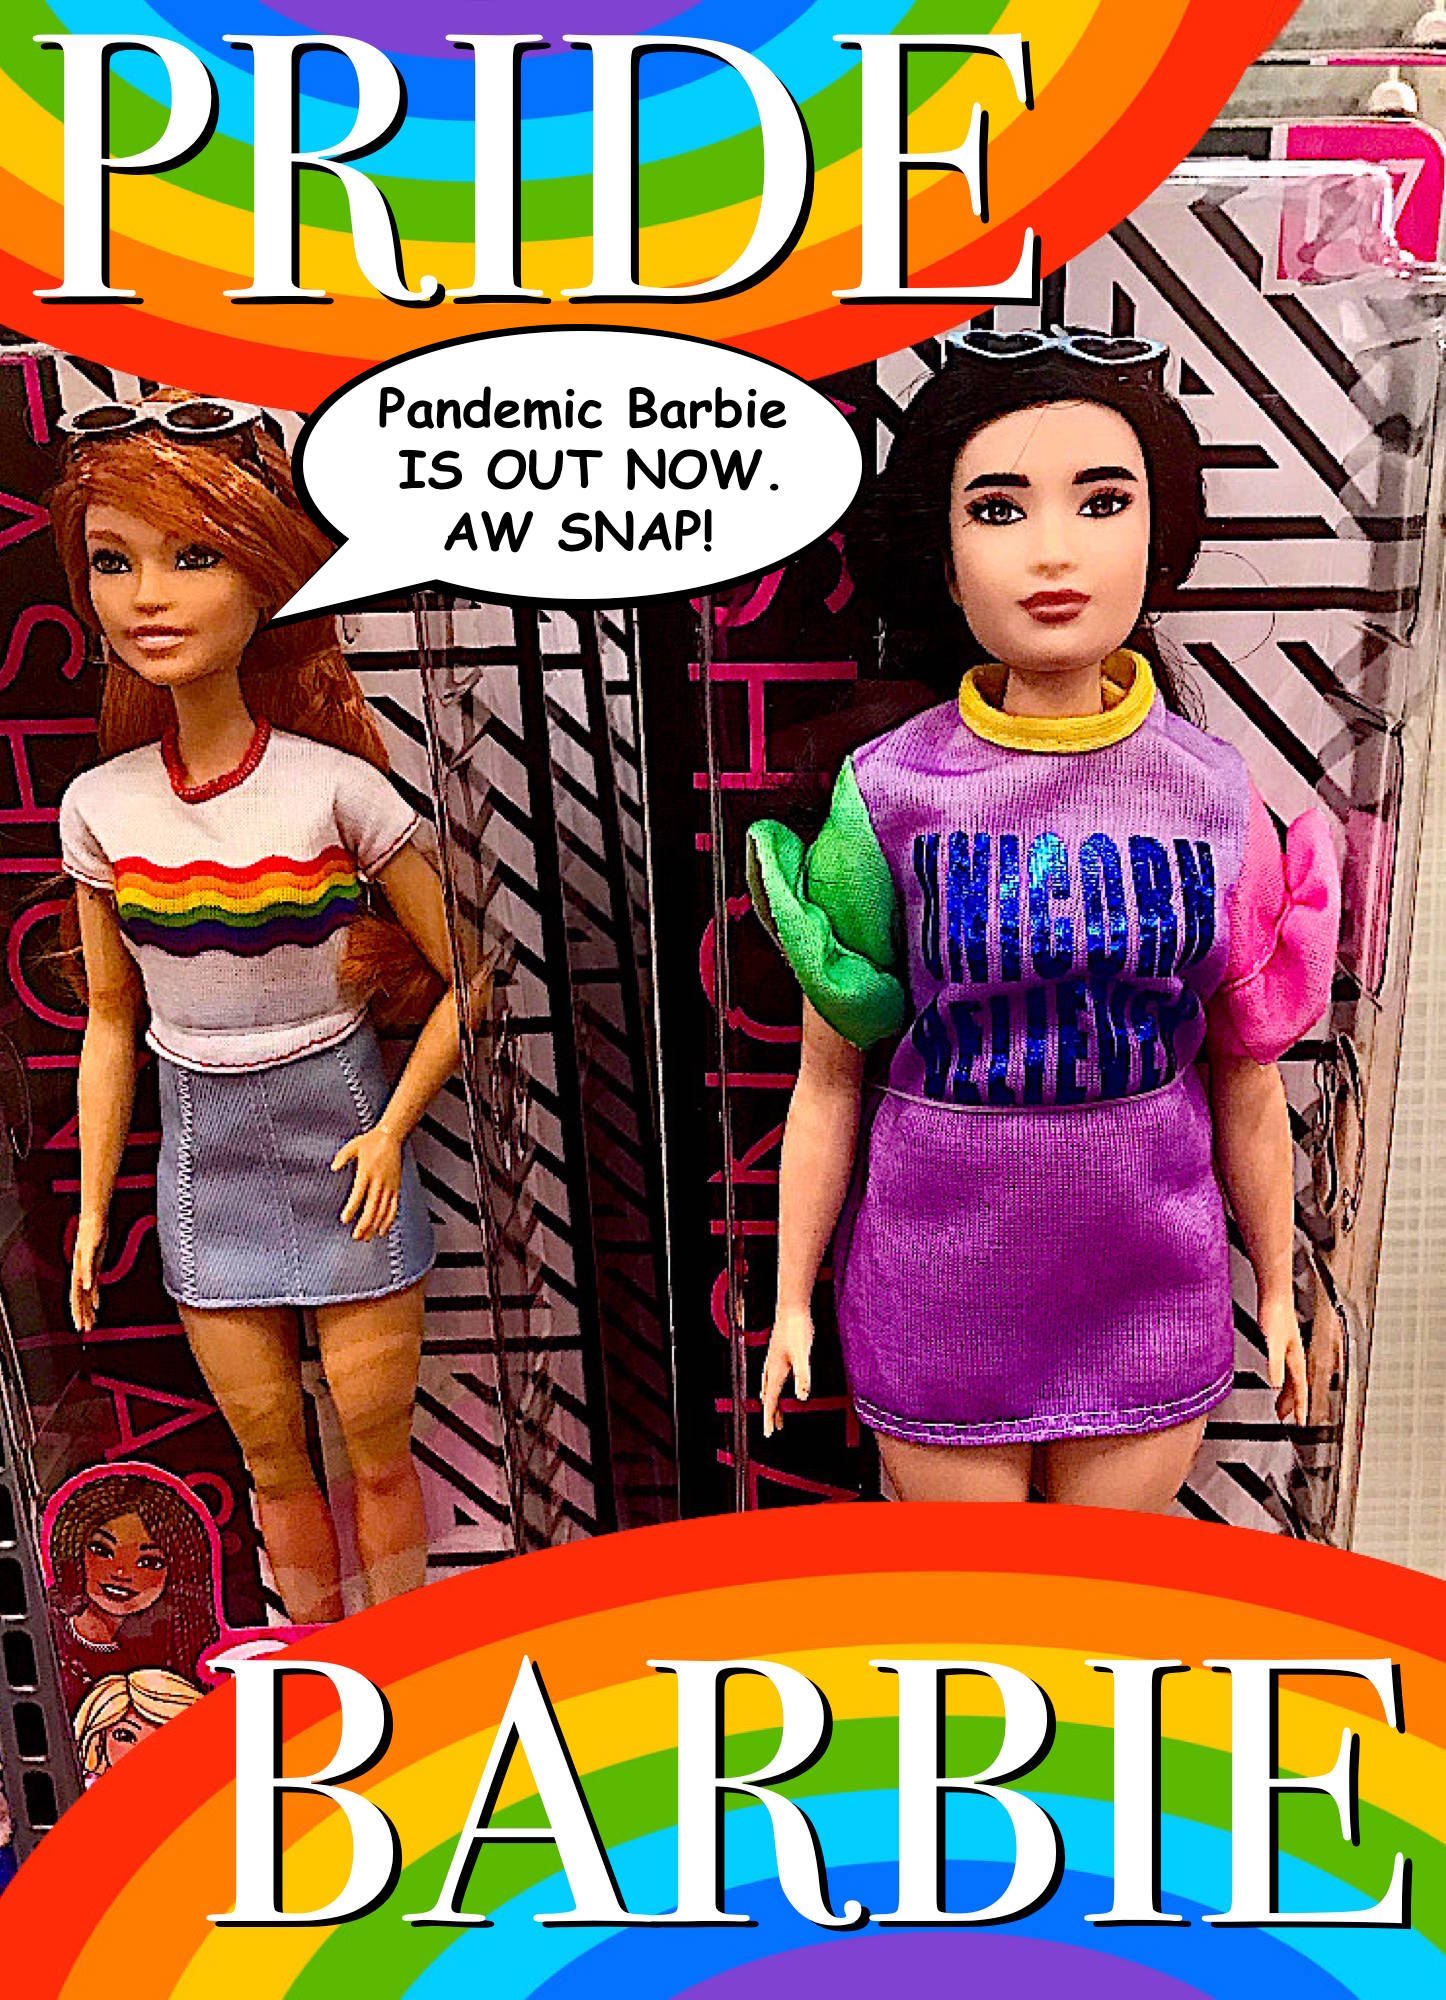 pride-barbie-pandemic-barbie-is-out-now-aw-snap-memes-imgflip